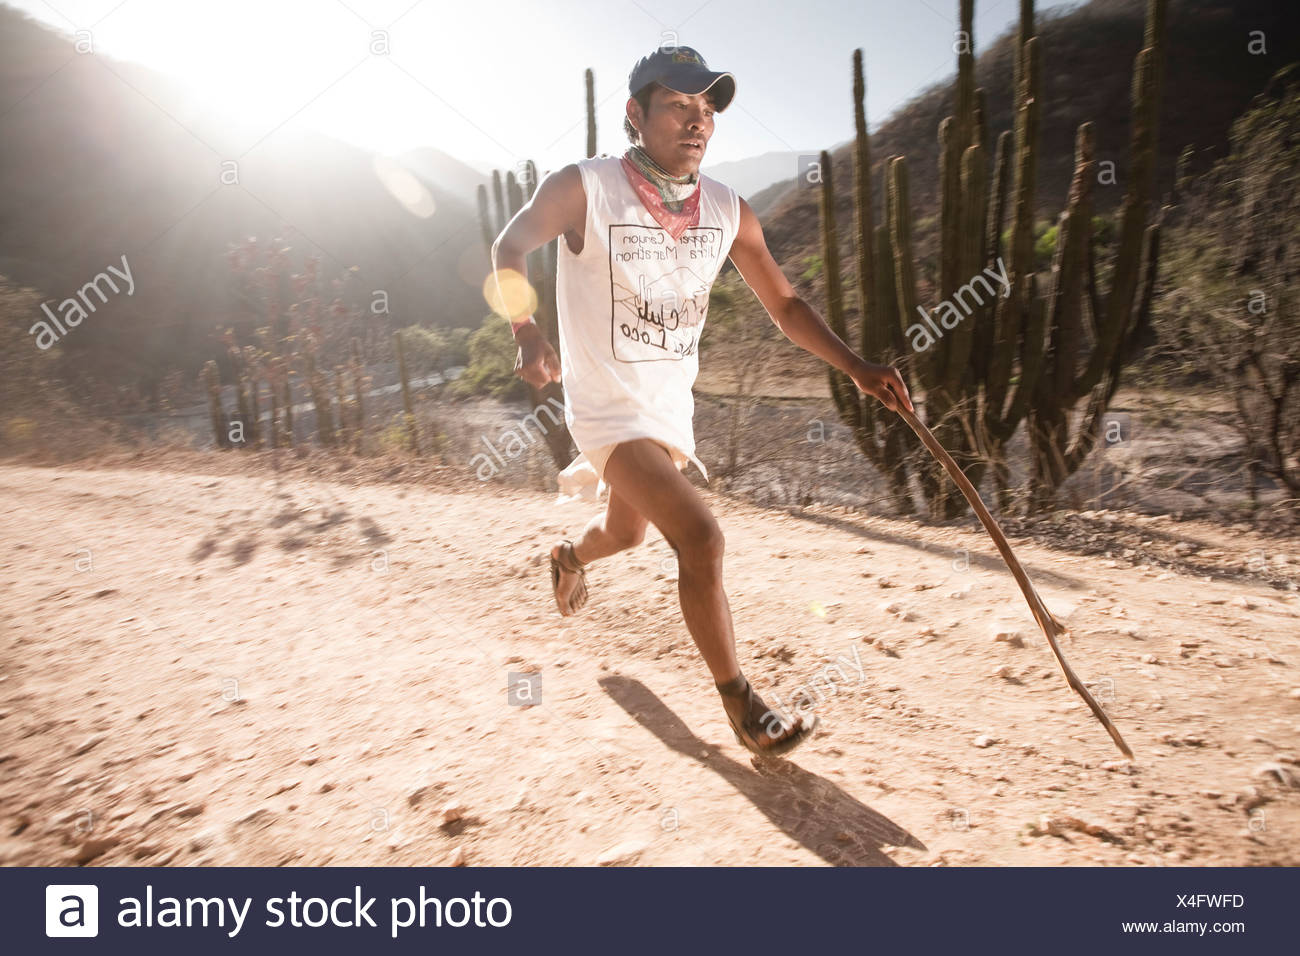 A Tarahumara Runner Running With A Stick As A Pole During An Ultra Marathon In Urique Chihuahua Mexico Stock Photo Alamy